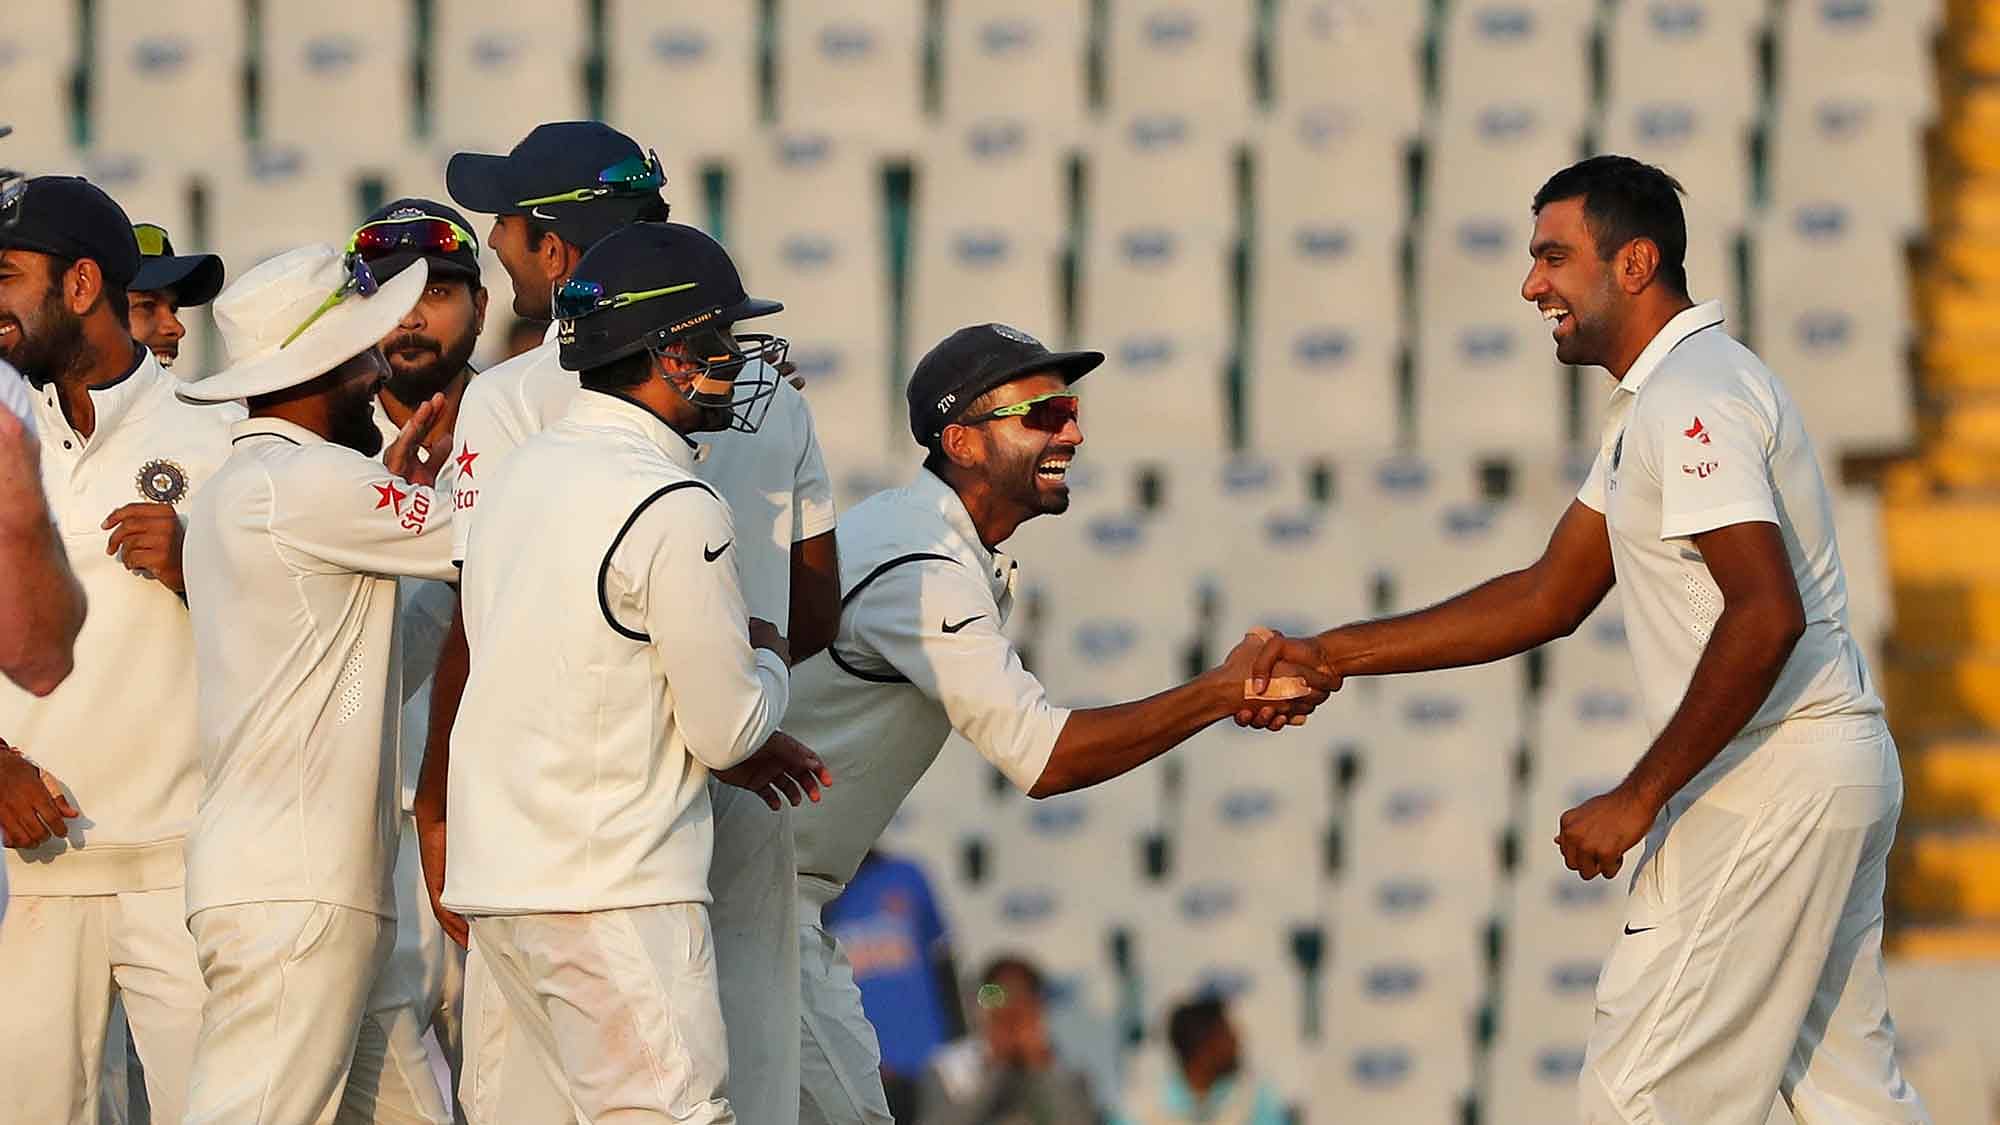 Ashwin his congratulated by Ajinkya Rahane for taking a wicket on Day 3 of the Mohali Test. (Photo: BCCI)